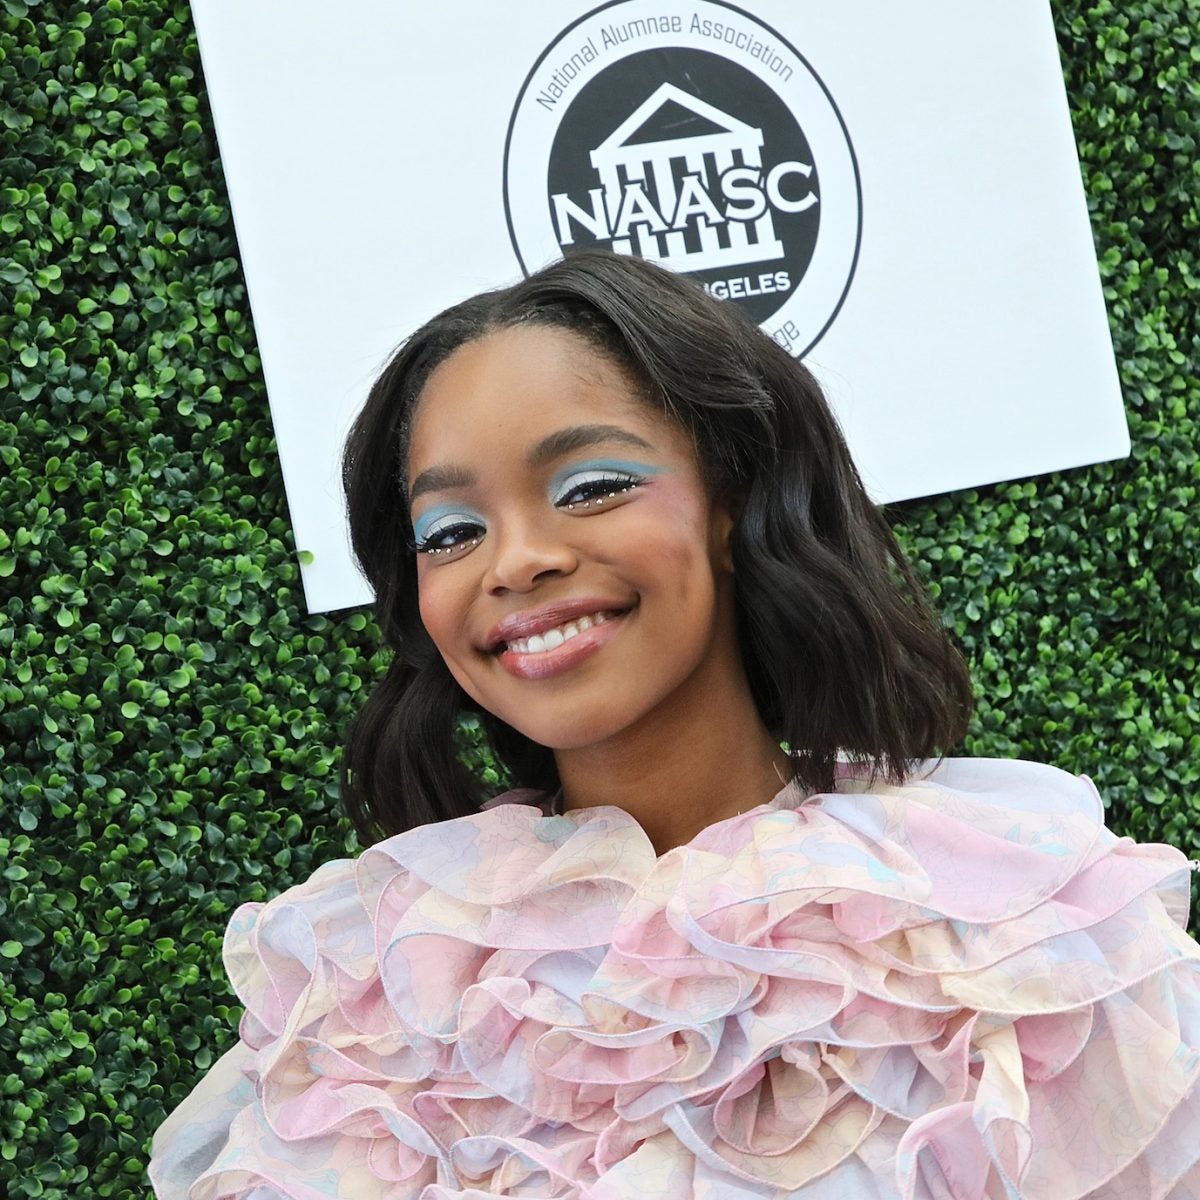 Marsai Martin Enlists Young Hollywood Stars For Comfy Spin On #DontRushChallenge